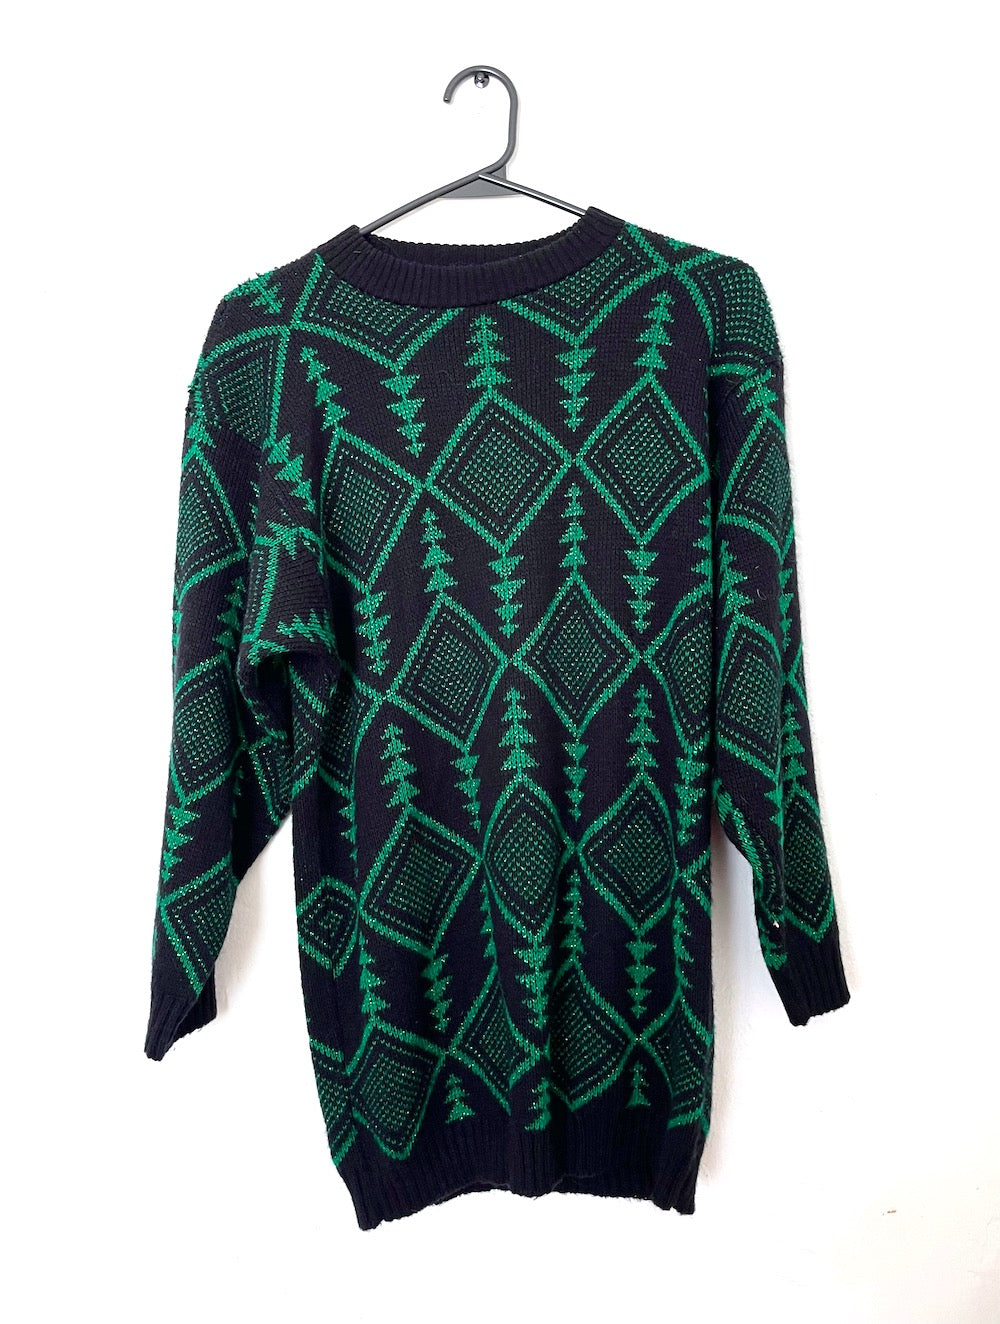 Vintage 80s Metallic Green and Black Graphic Sweater